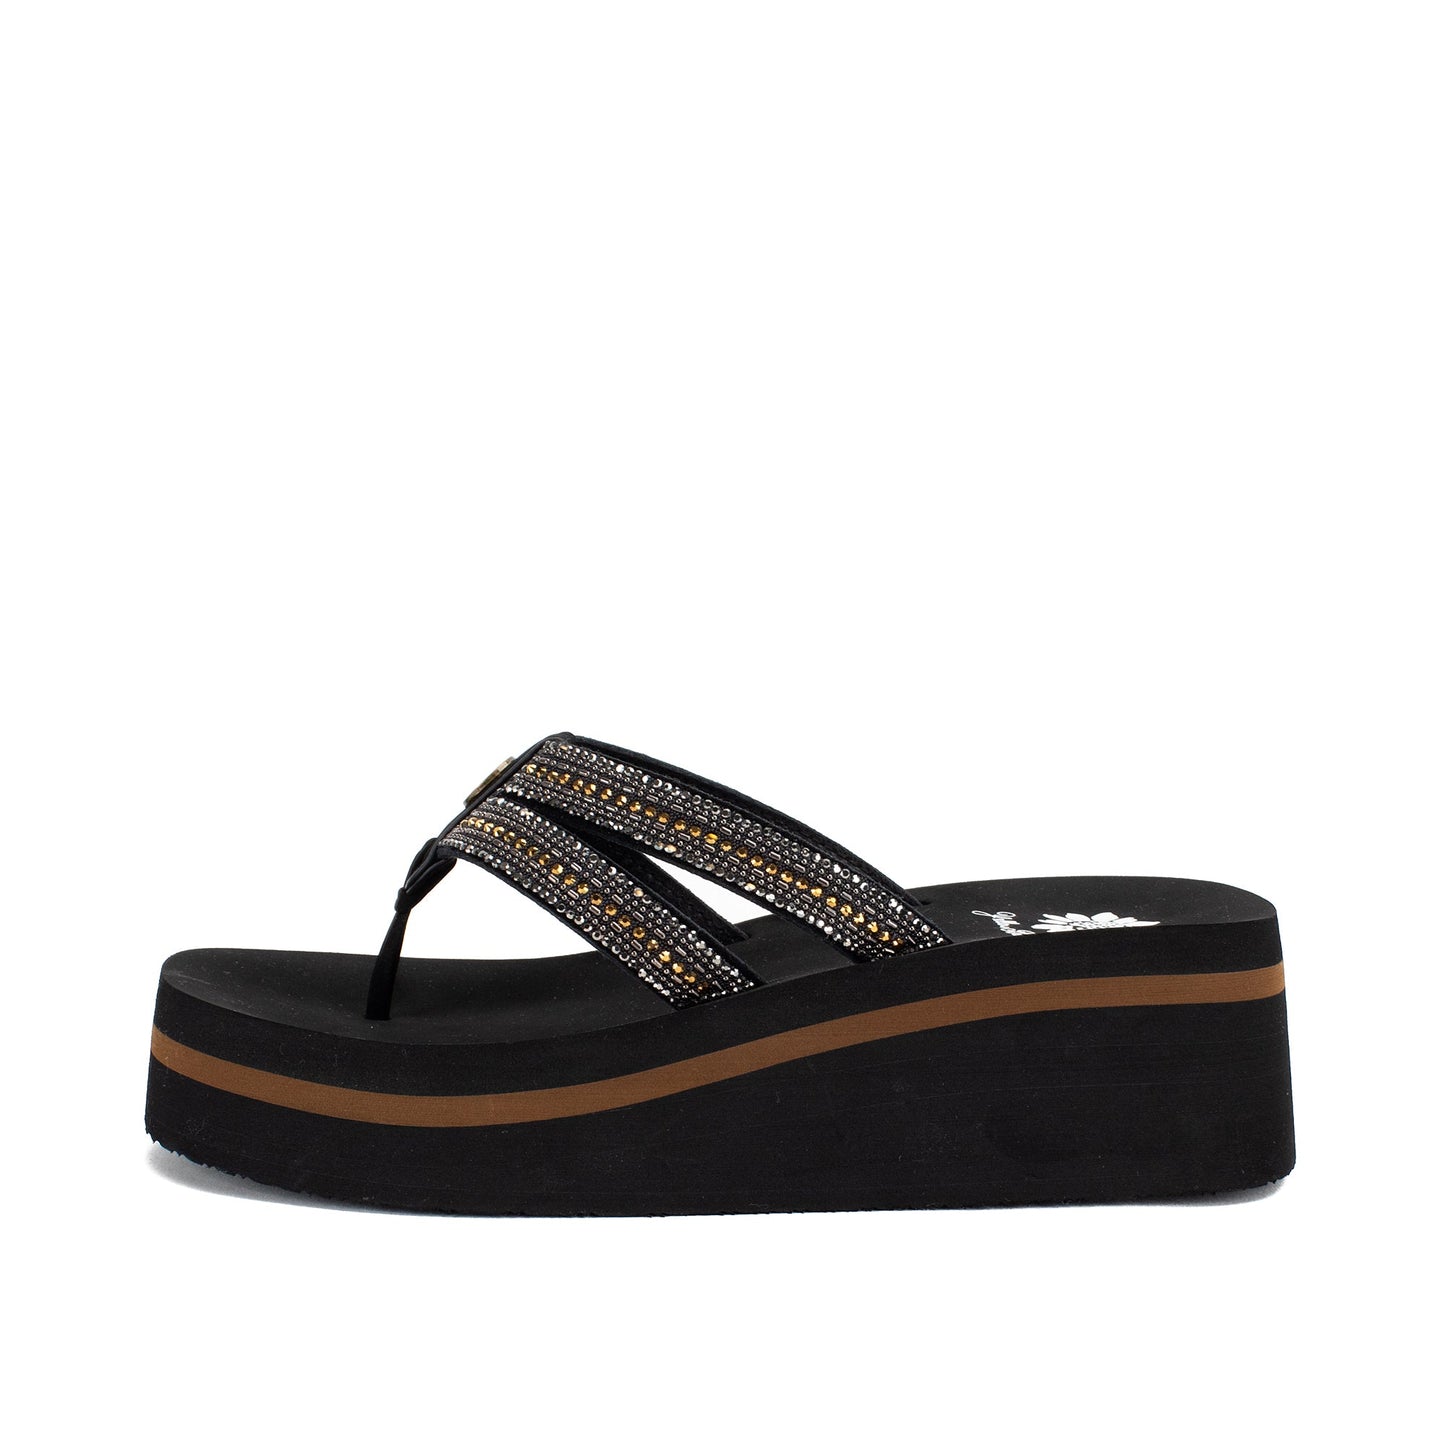 Krista Flatform Sandals by Yellow Box Shoes